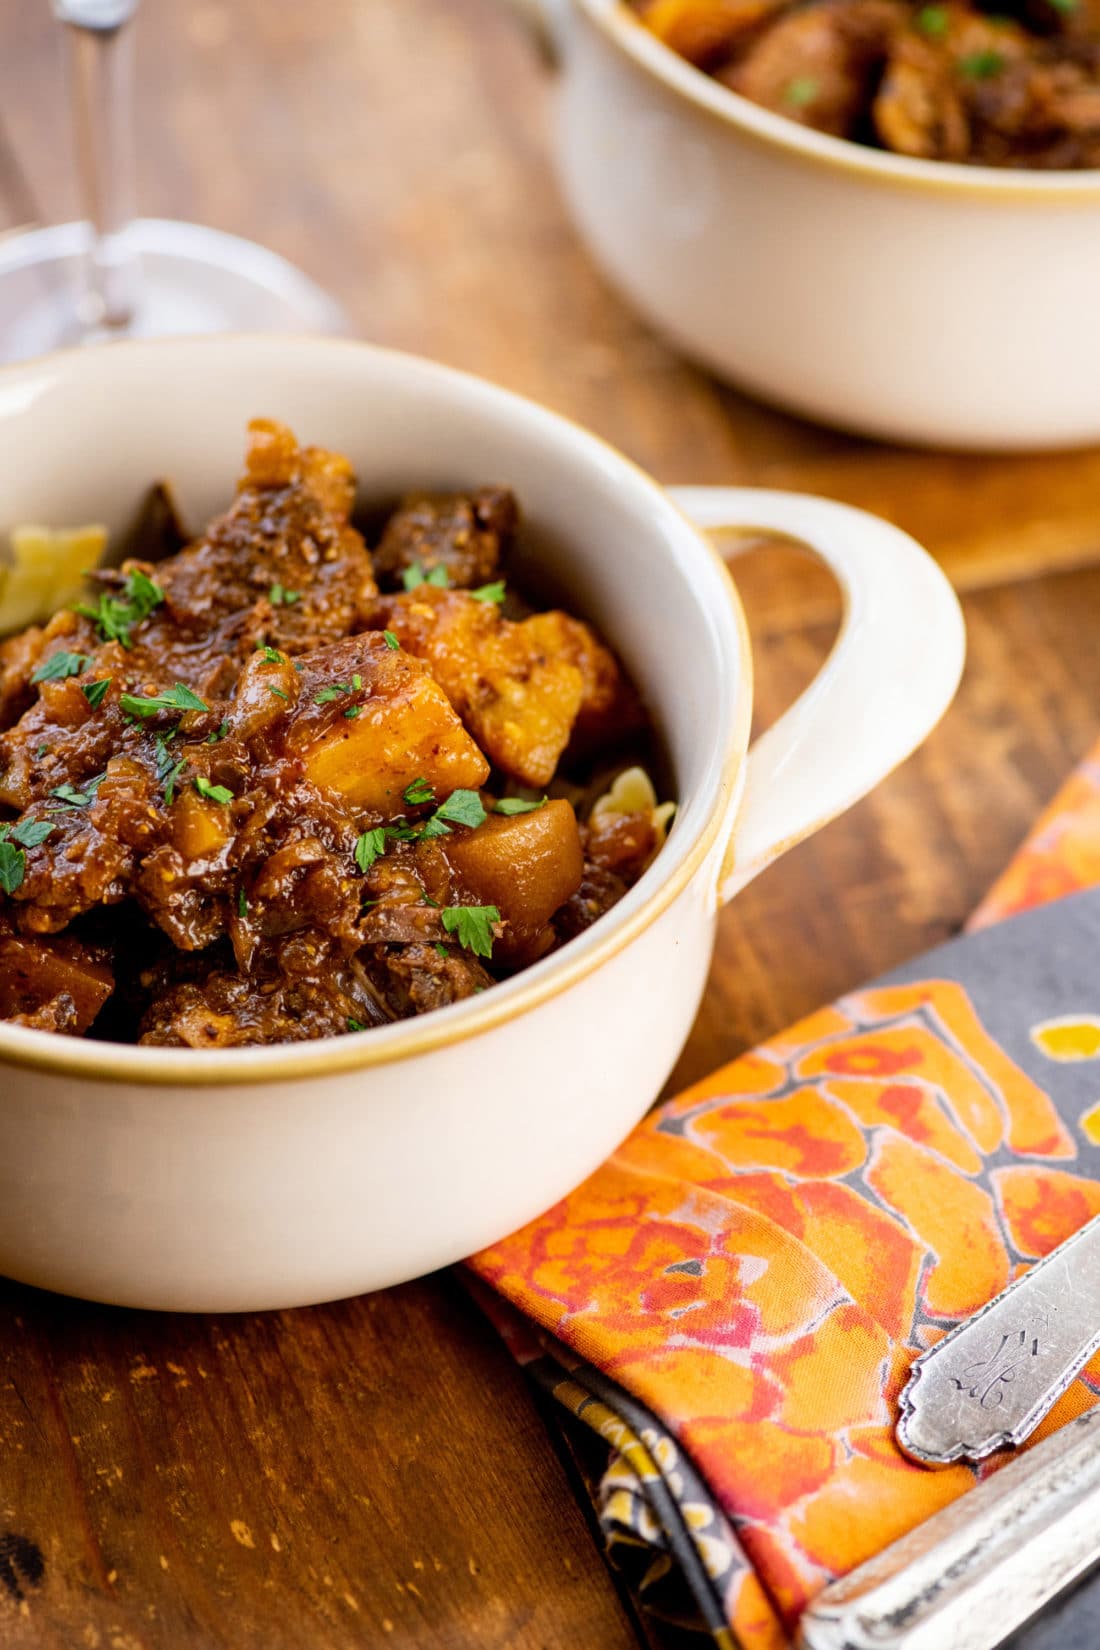 Slow Cooker Barbecue Beer Beef Stew / Photo by Cheyenne Cohen / Katie Workman / themom100.com